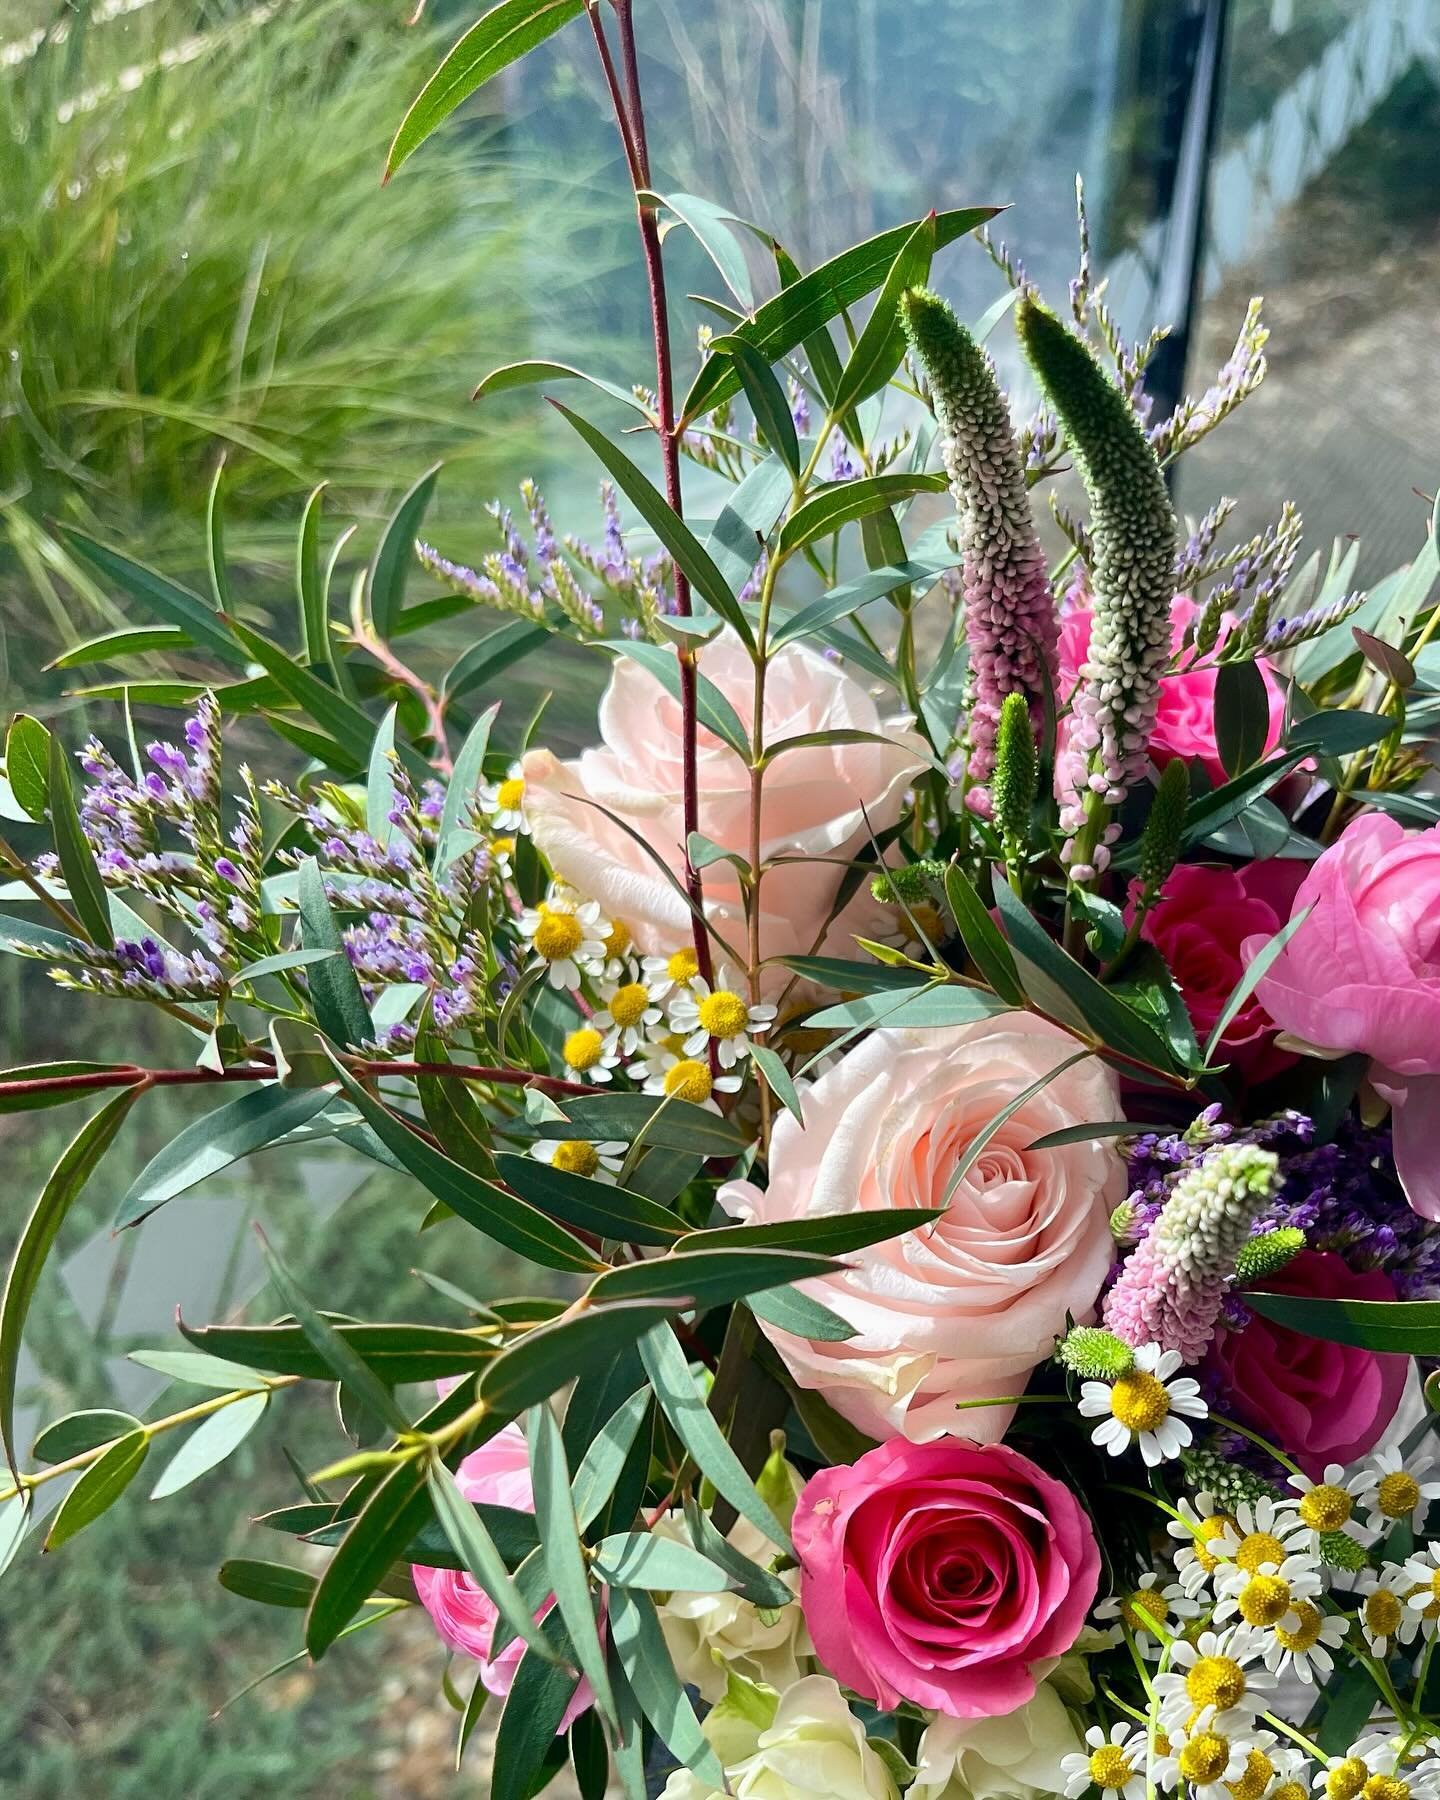 Wishing for sunshine this weekend! Studio open Saturday 10-4pm, be sure to pop down for takeaway bouquets. Sunday we're off to Clawd Offa Farm's Wedding Fayre and we can't wait!!